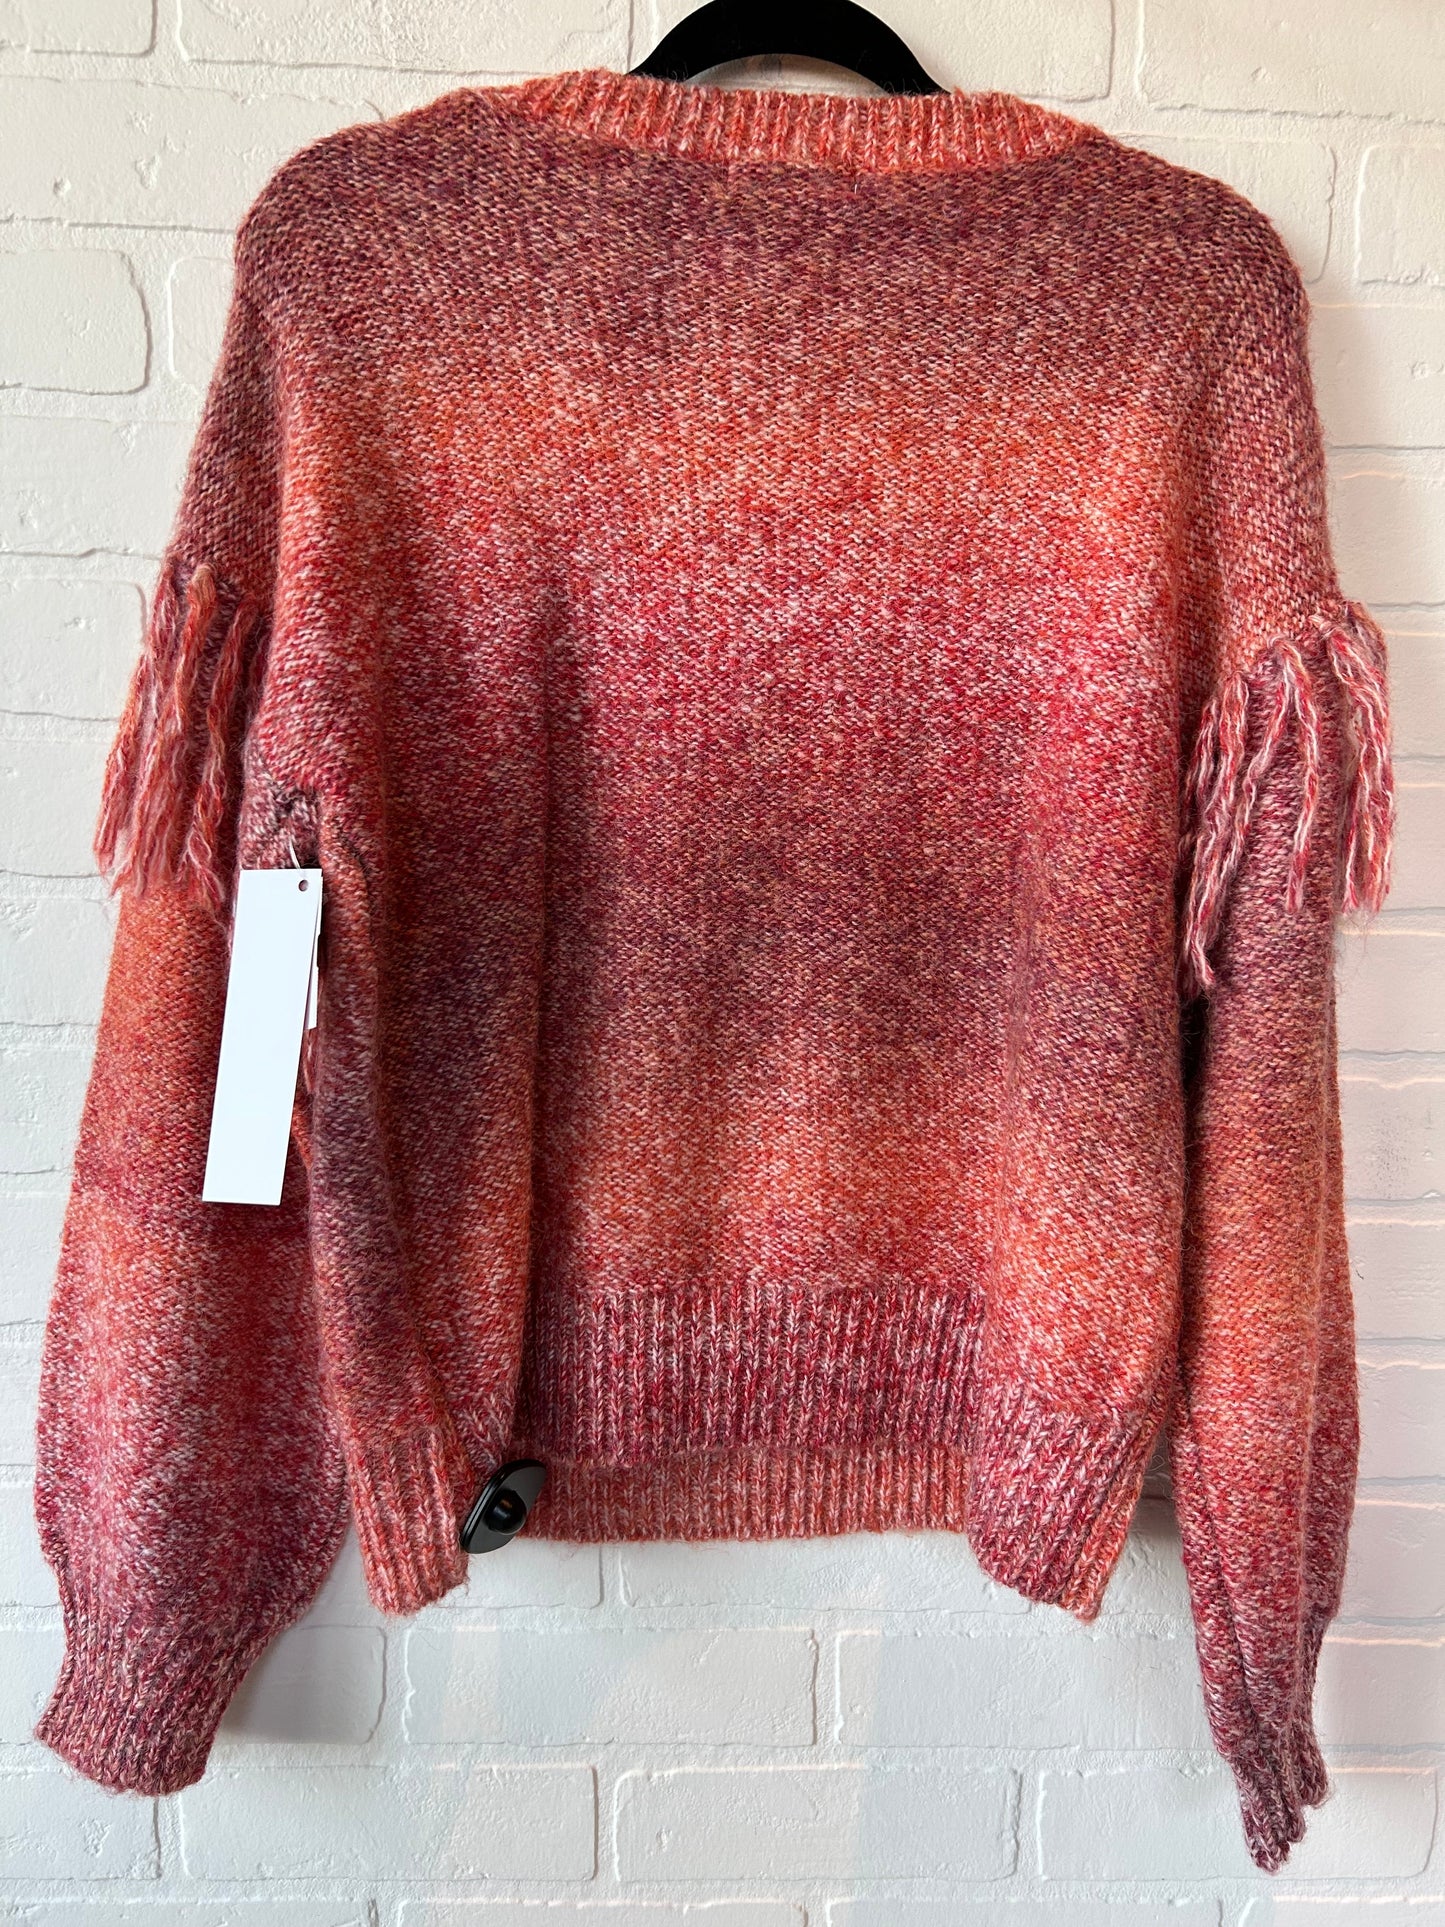 Orange & Red Sweater Frye And Co, Size M